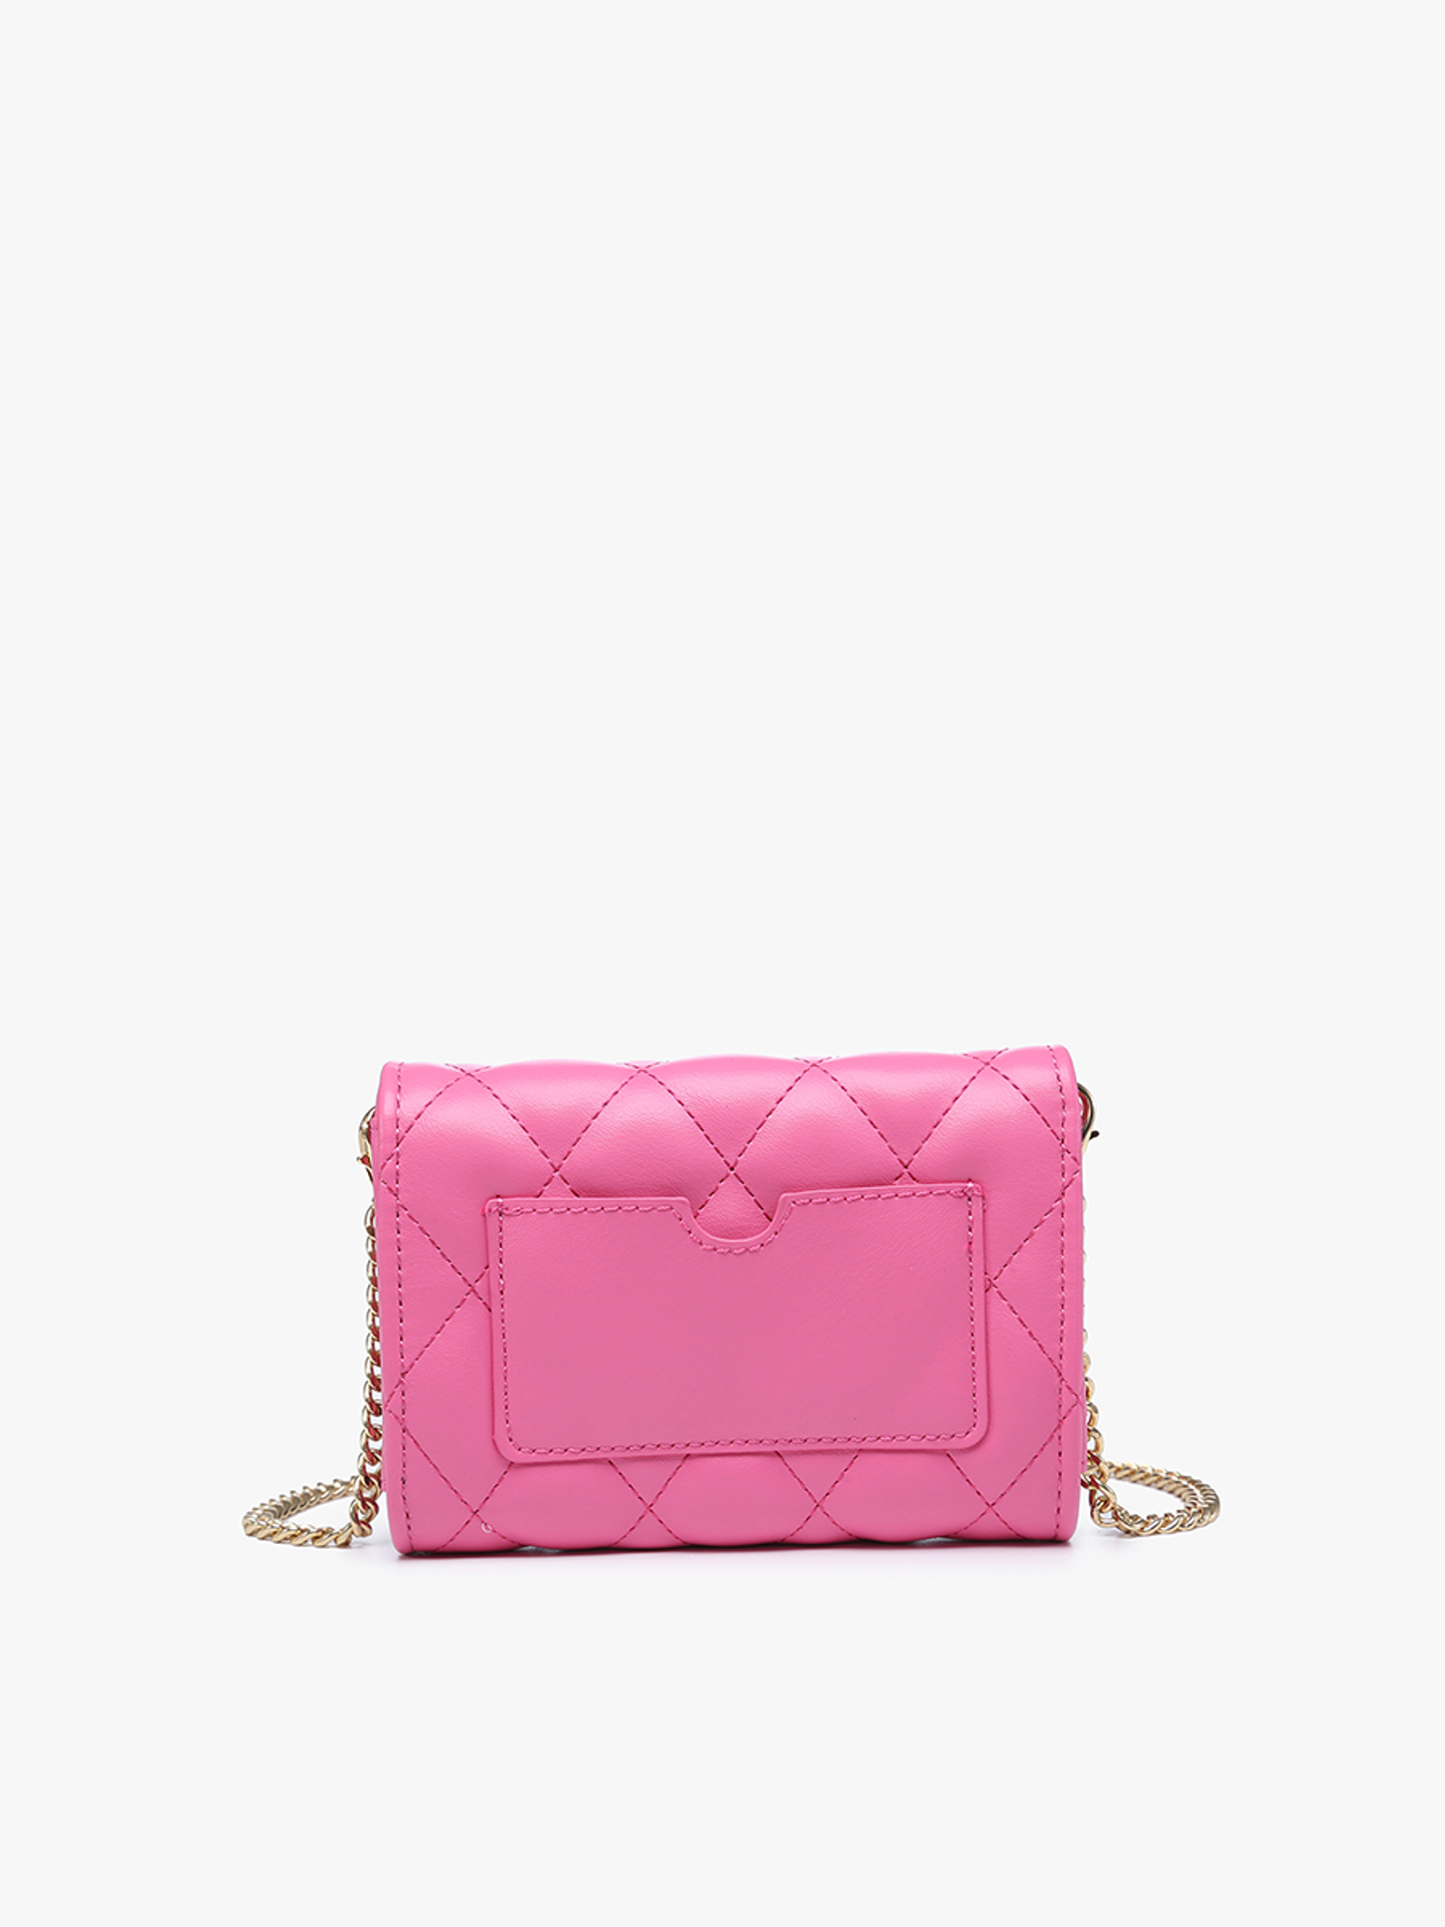 Quilted Clutch/Crossbody w/ Chain Strap